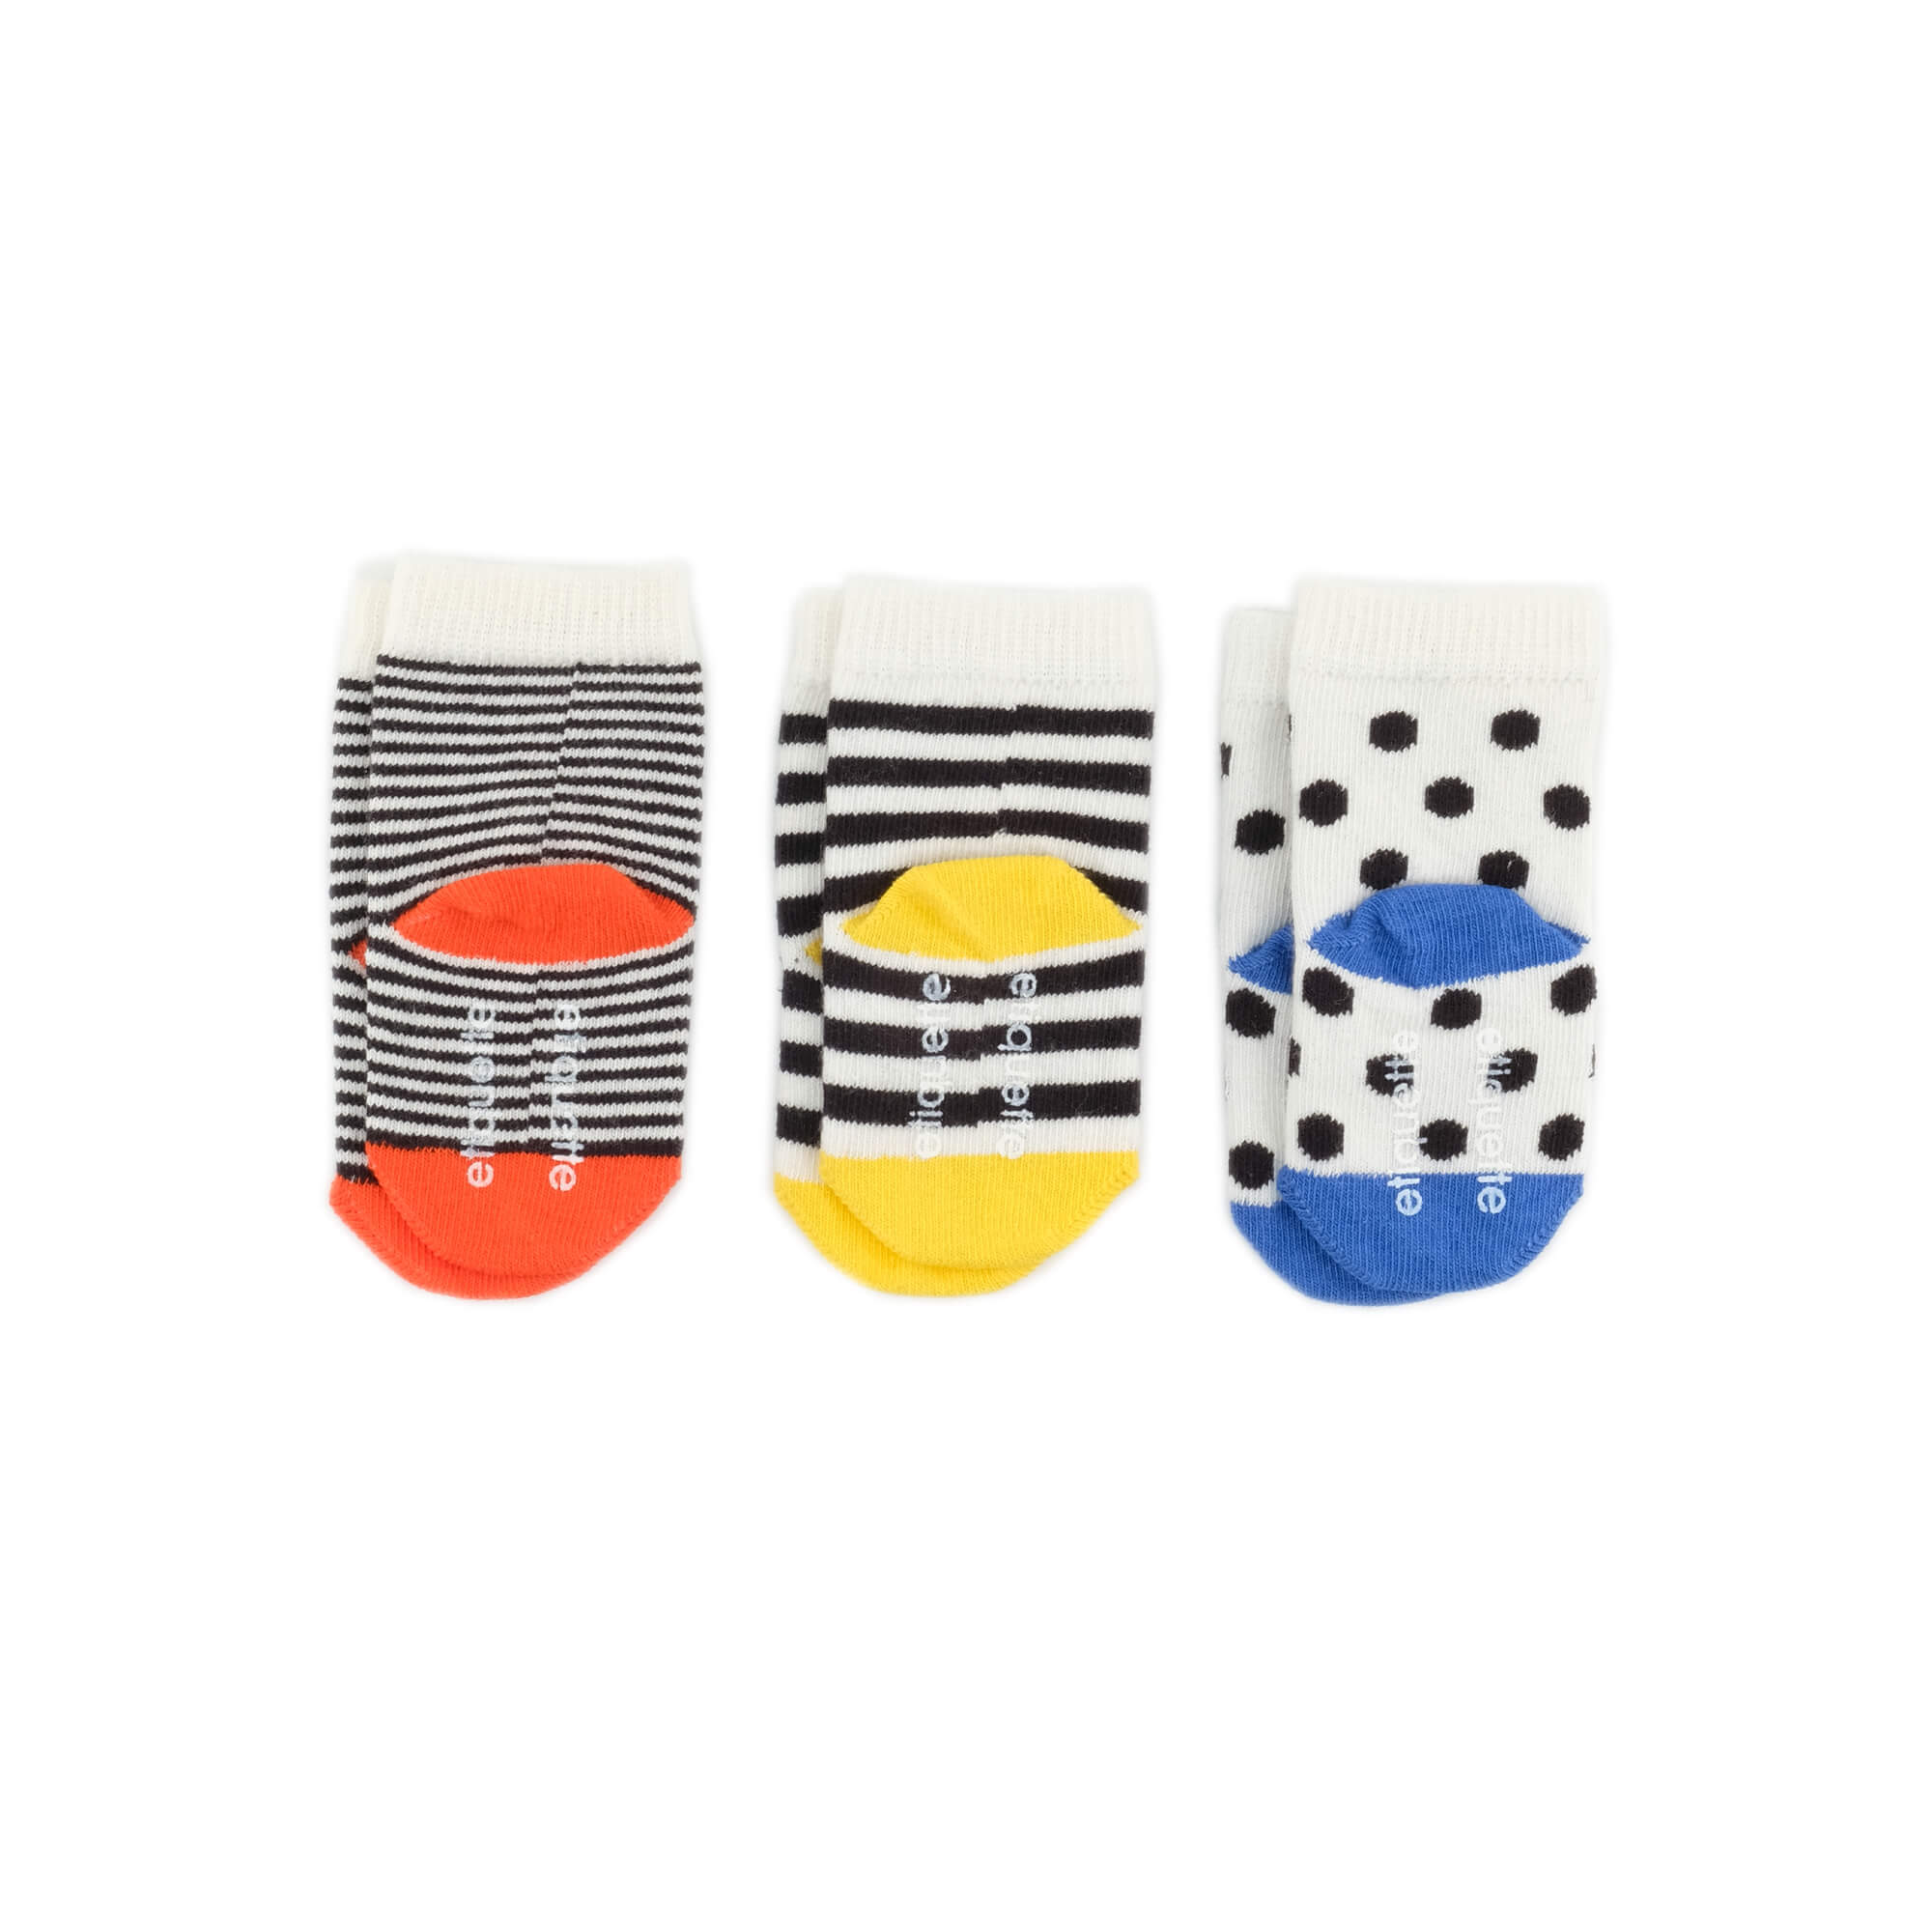 Baby Socks - Miffy x Etiquette Classic Baby Socks Gift Box - nijntje colorful baby socks - product back view⎪Lil'Etiquette Clothiers